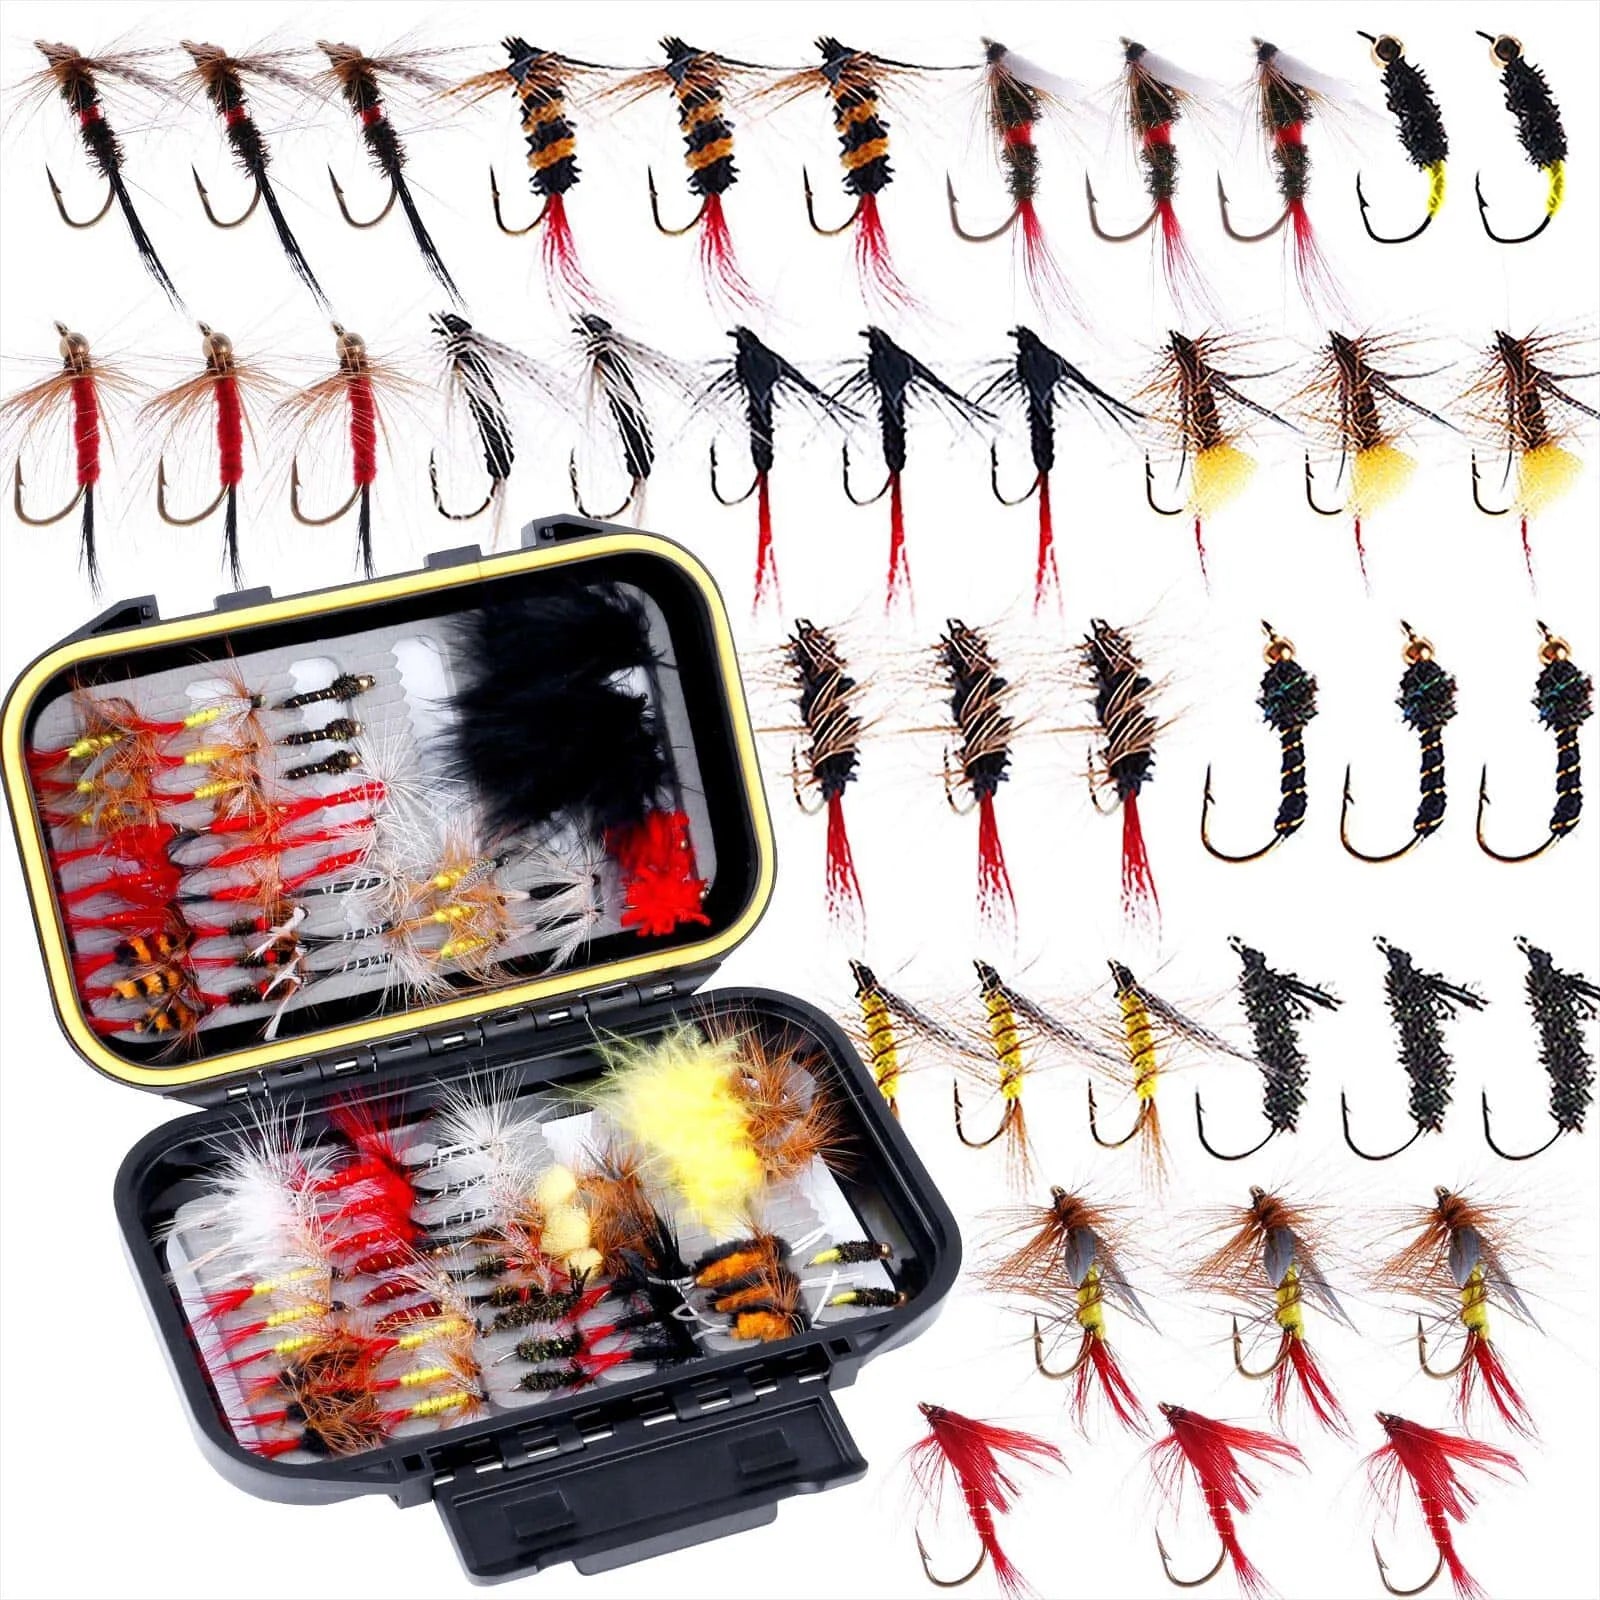 PLUSINNO 189pcs Fishing Accessories Kit, Fishing Tackle Box with Tackle  Included, Fishing Hooks, Fishing Weights, Spinner